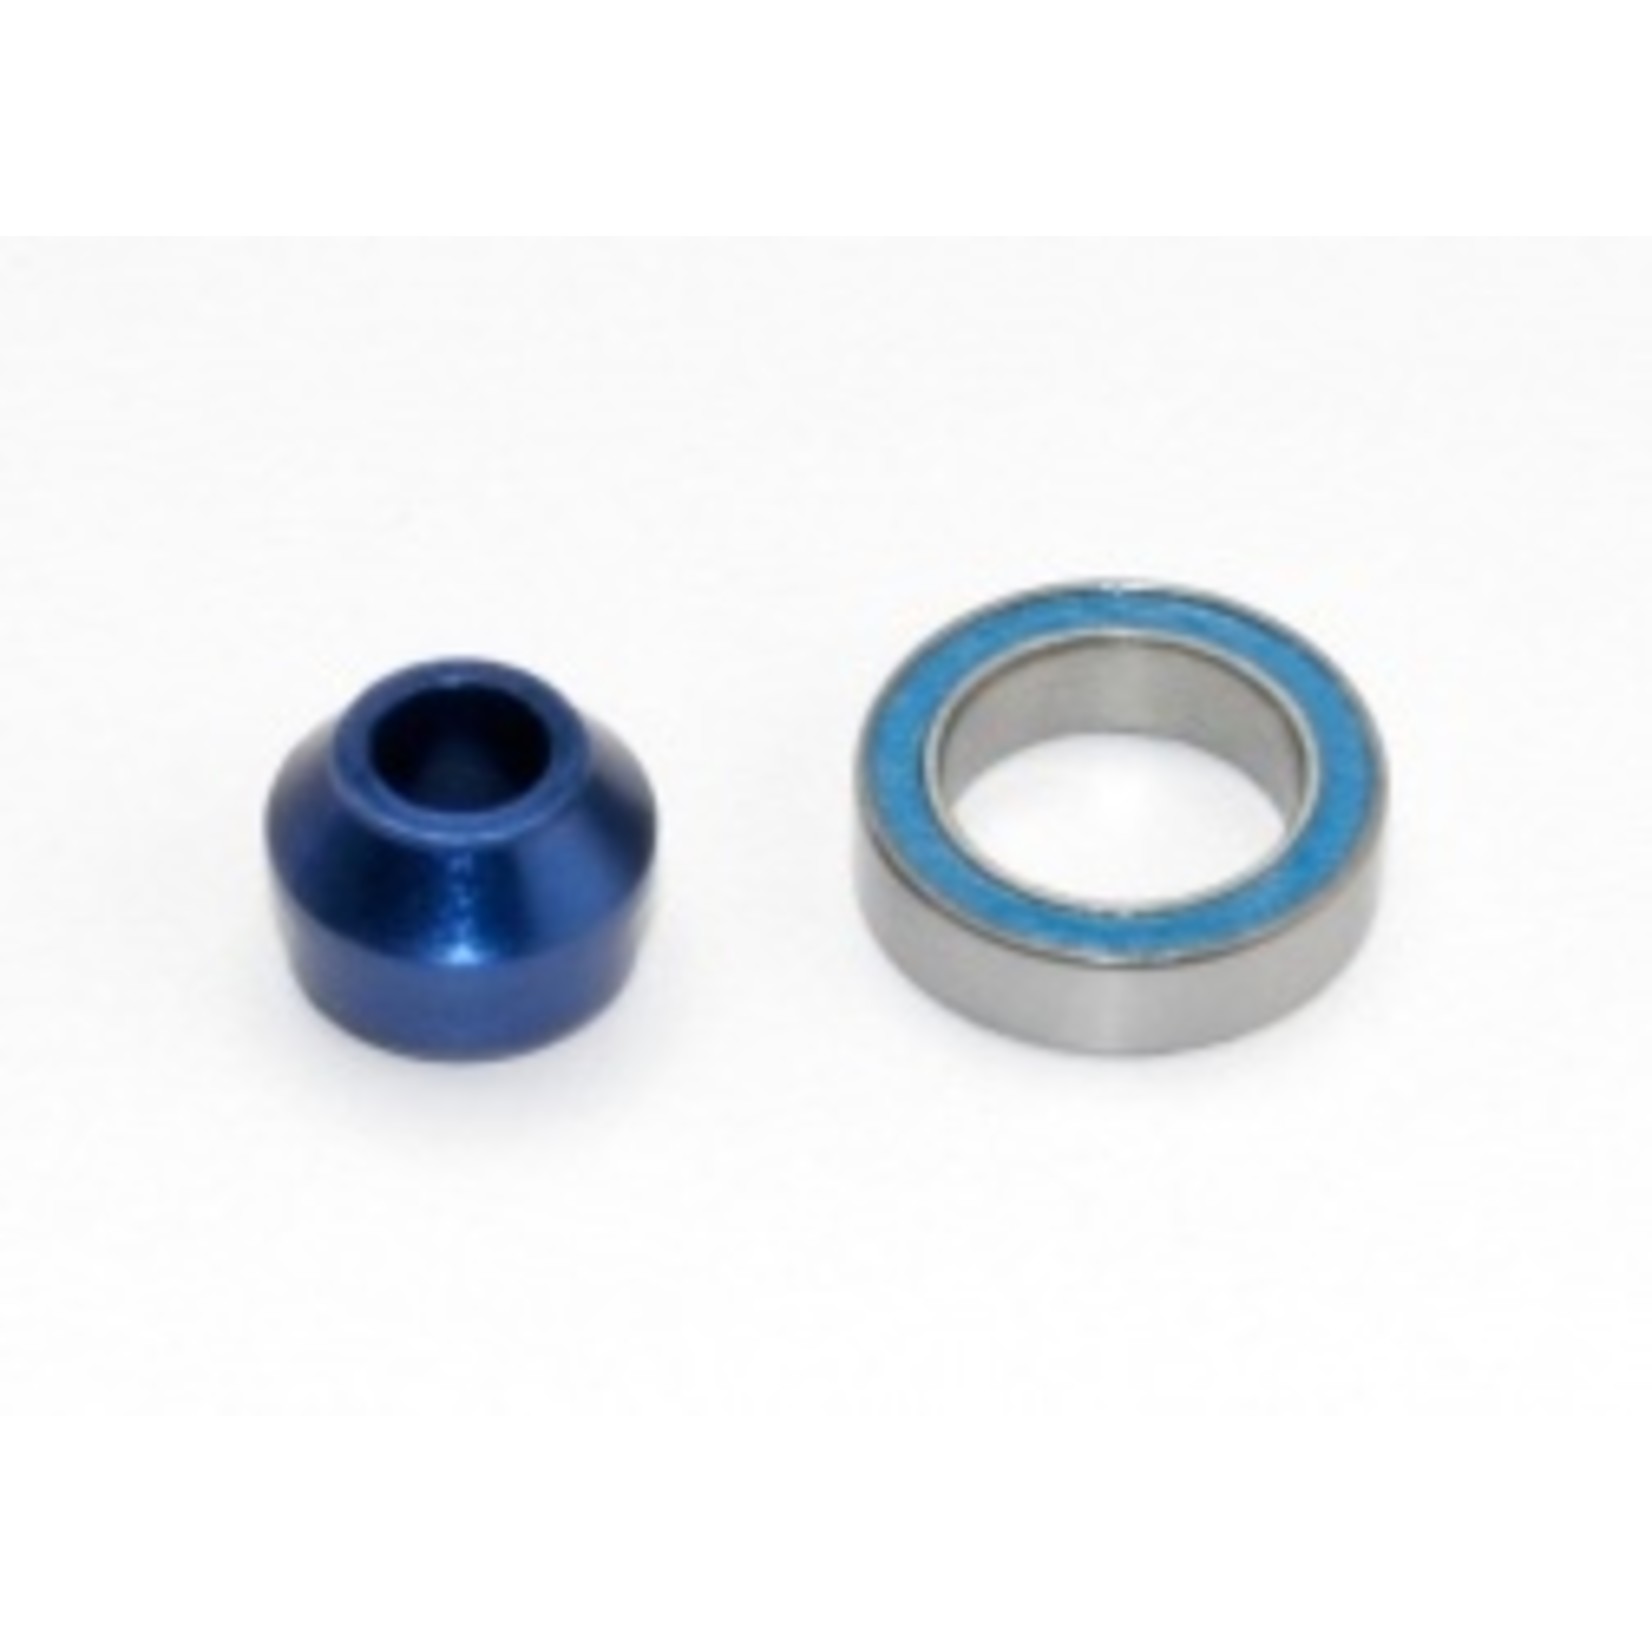 Traxxas Bearing adapter, 6061-T6 aluminum (blue-anodized)